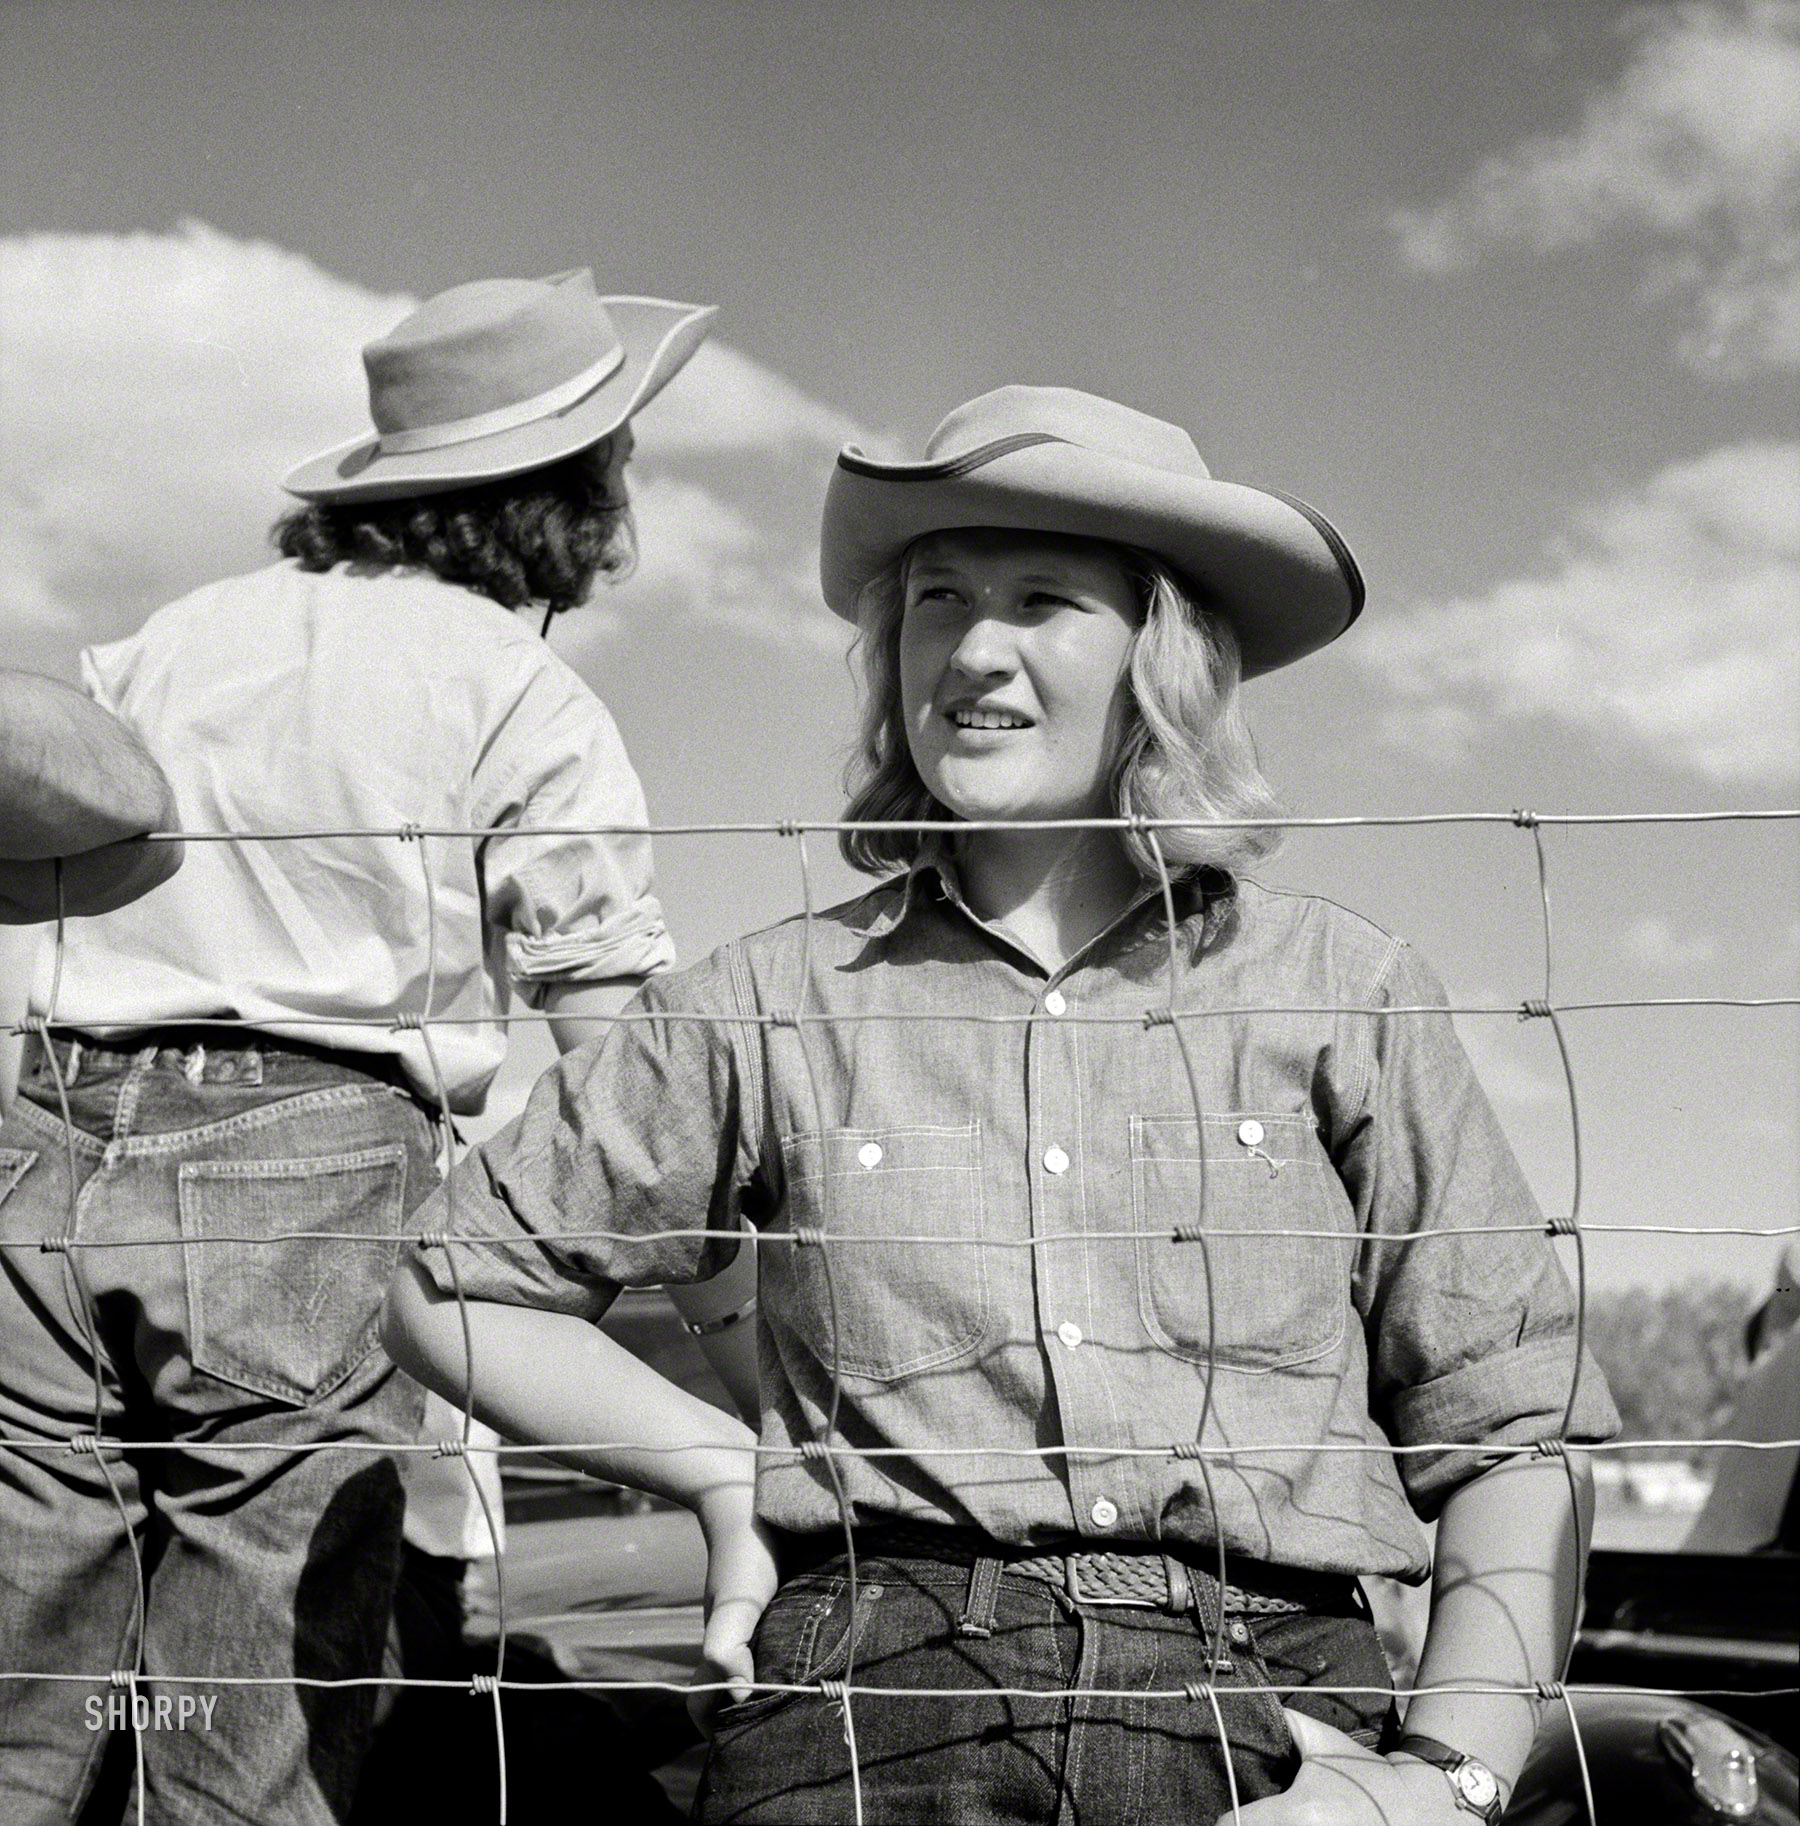 August 1941. "Dudes from Quarter Circle U Ranch at Crow Indian fair. Crow Agency, Big Horn County, Montana." Medium format negative by Marion Post Wolcott for the Farm Security Administration. View full size.